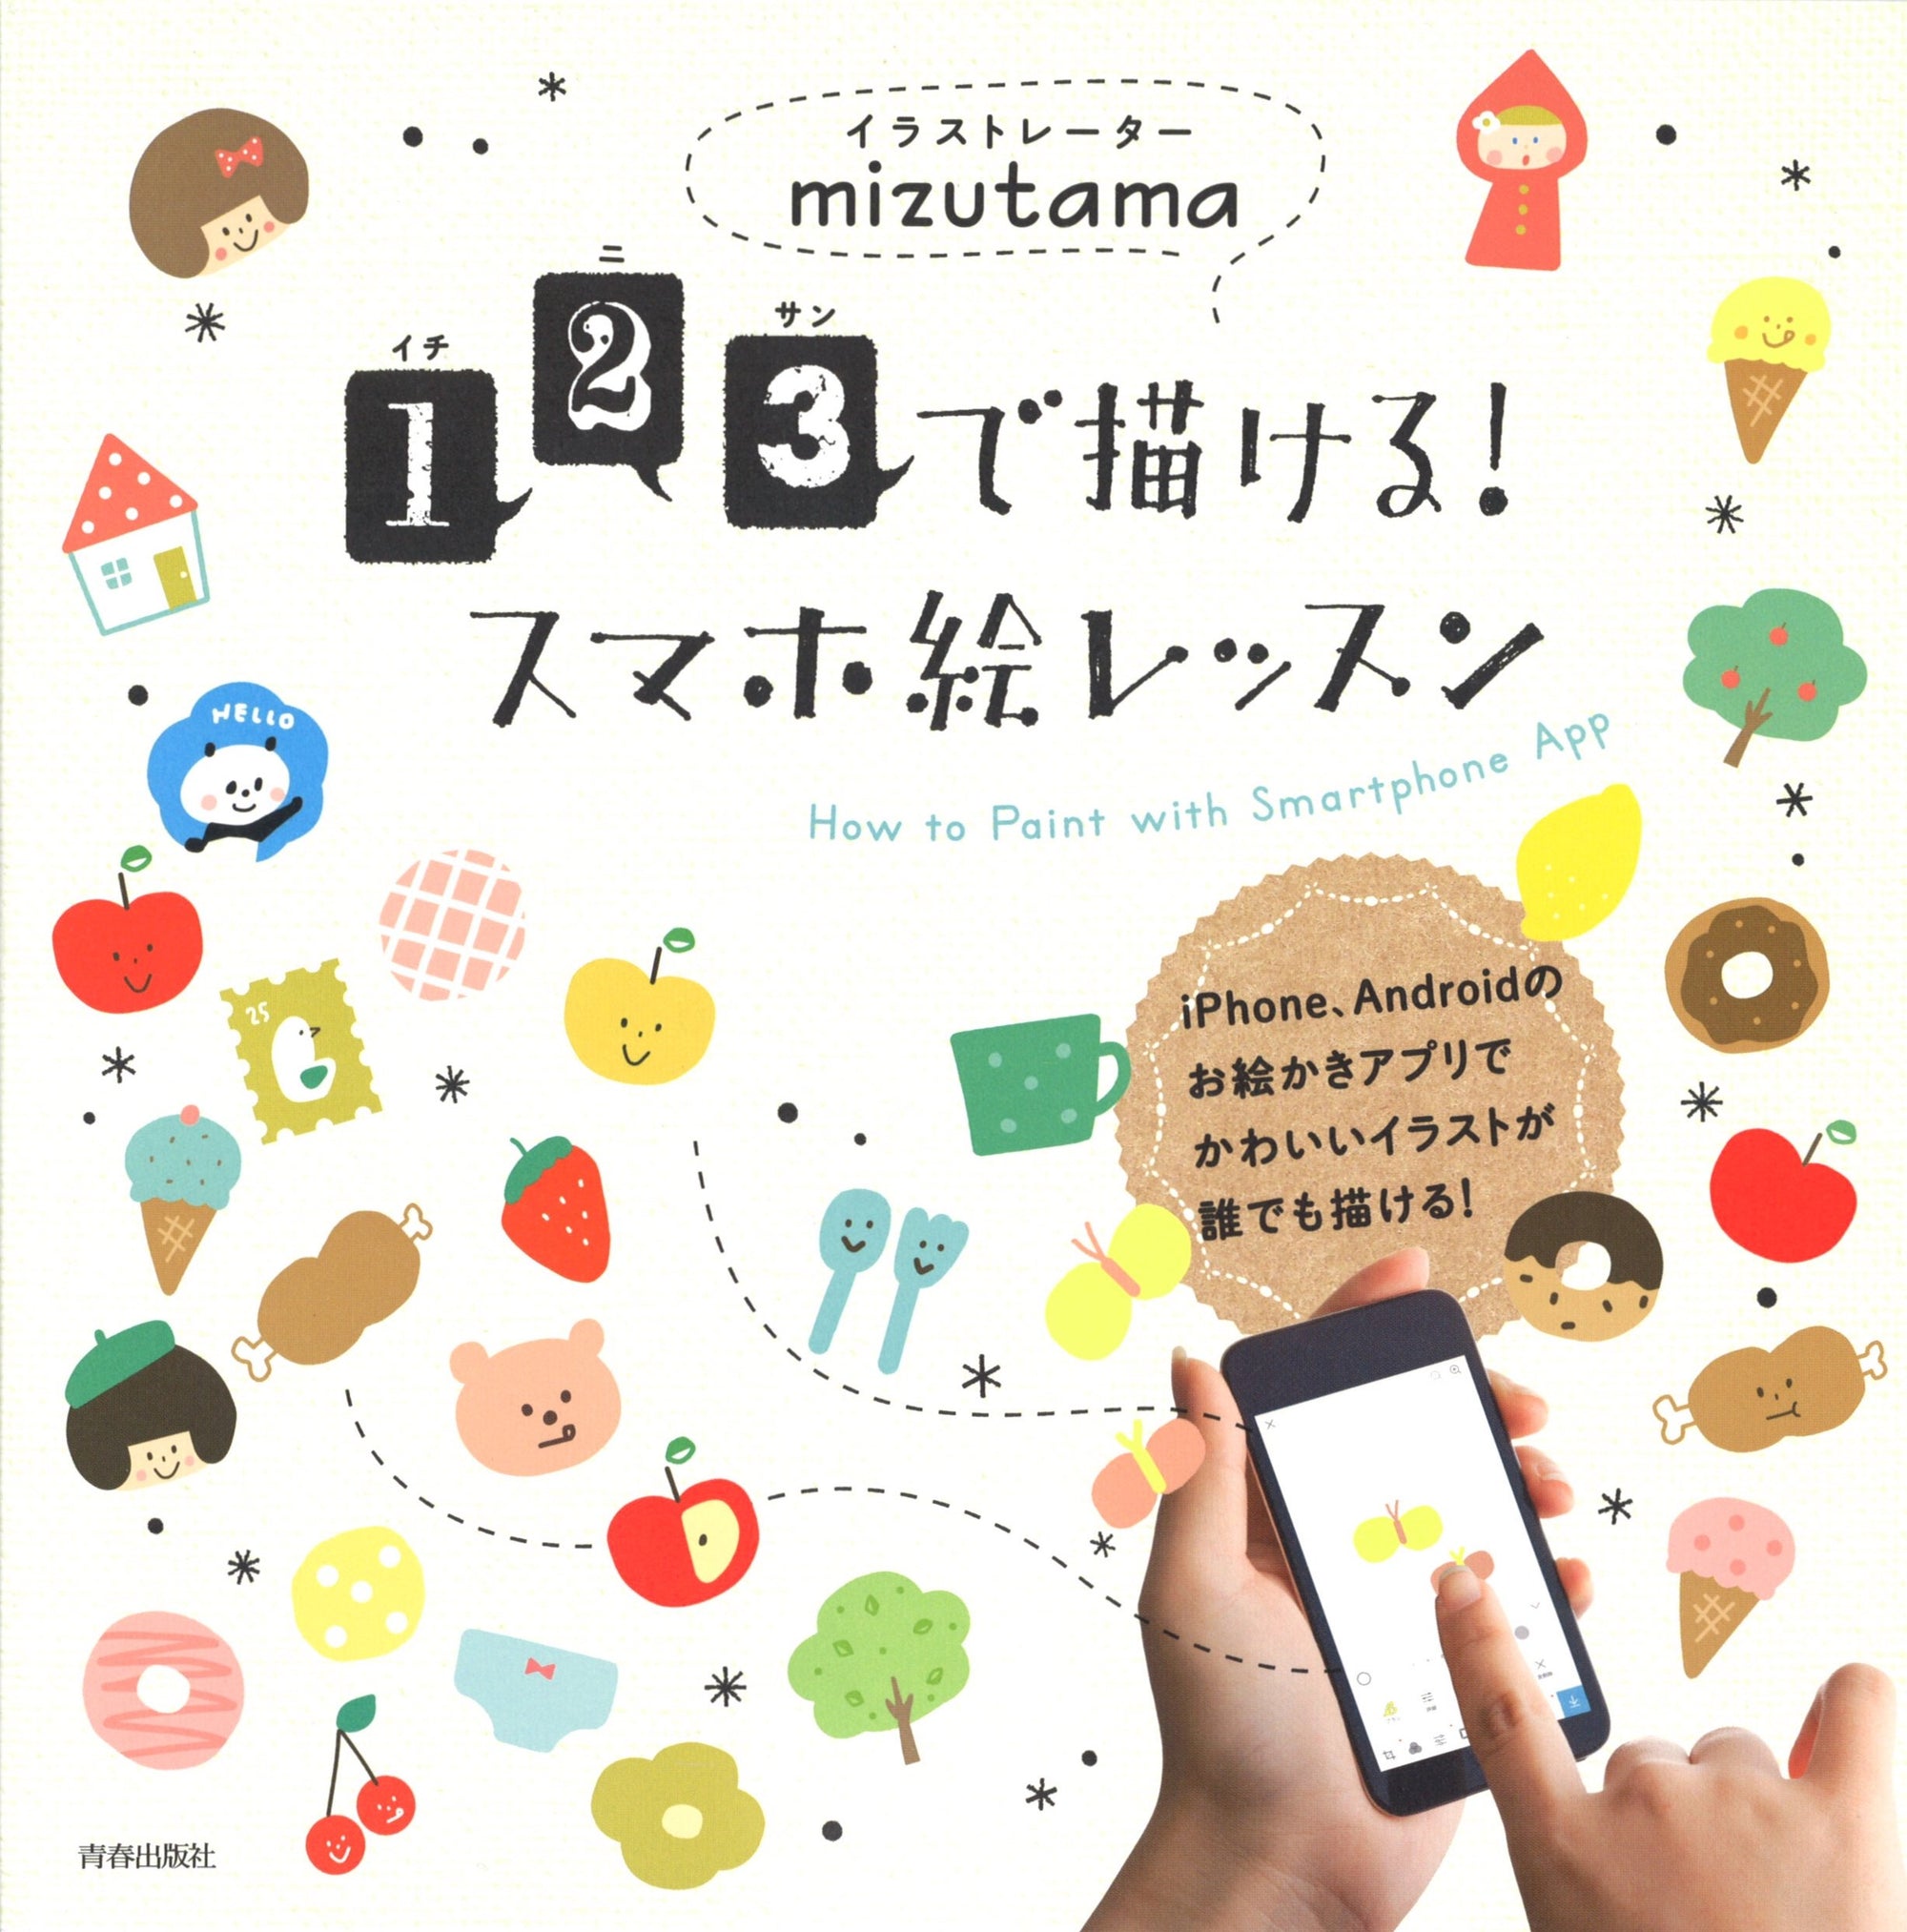 Mizutama You Can Draw With 1, 2, and 3! Smartphone Painting Lesson